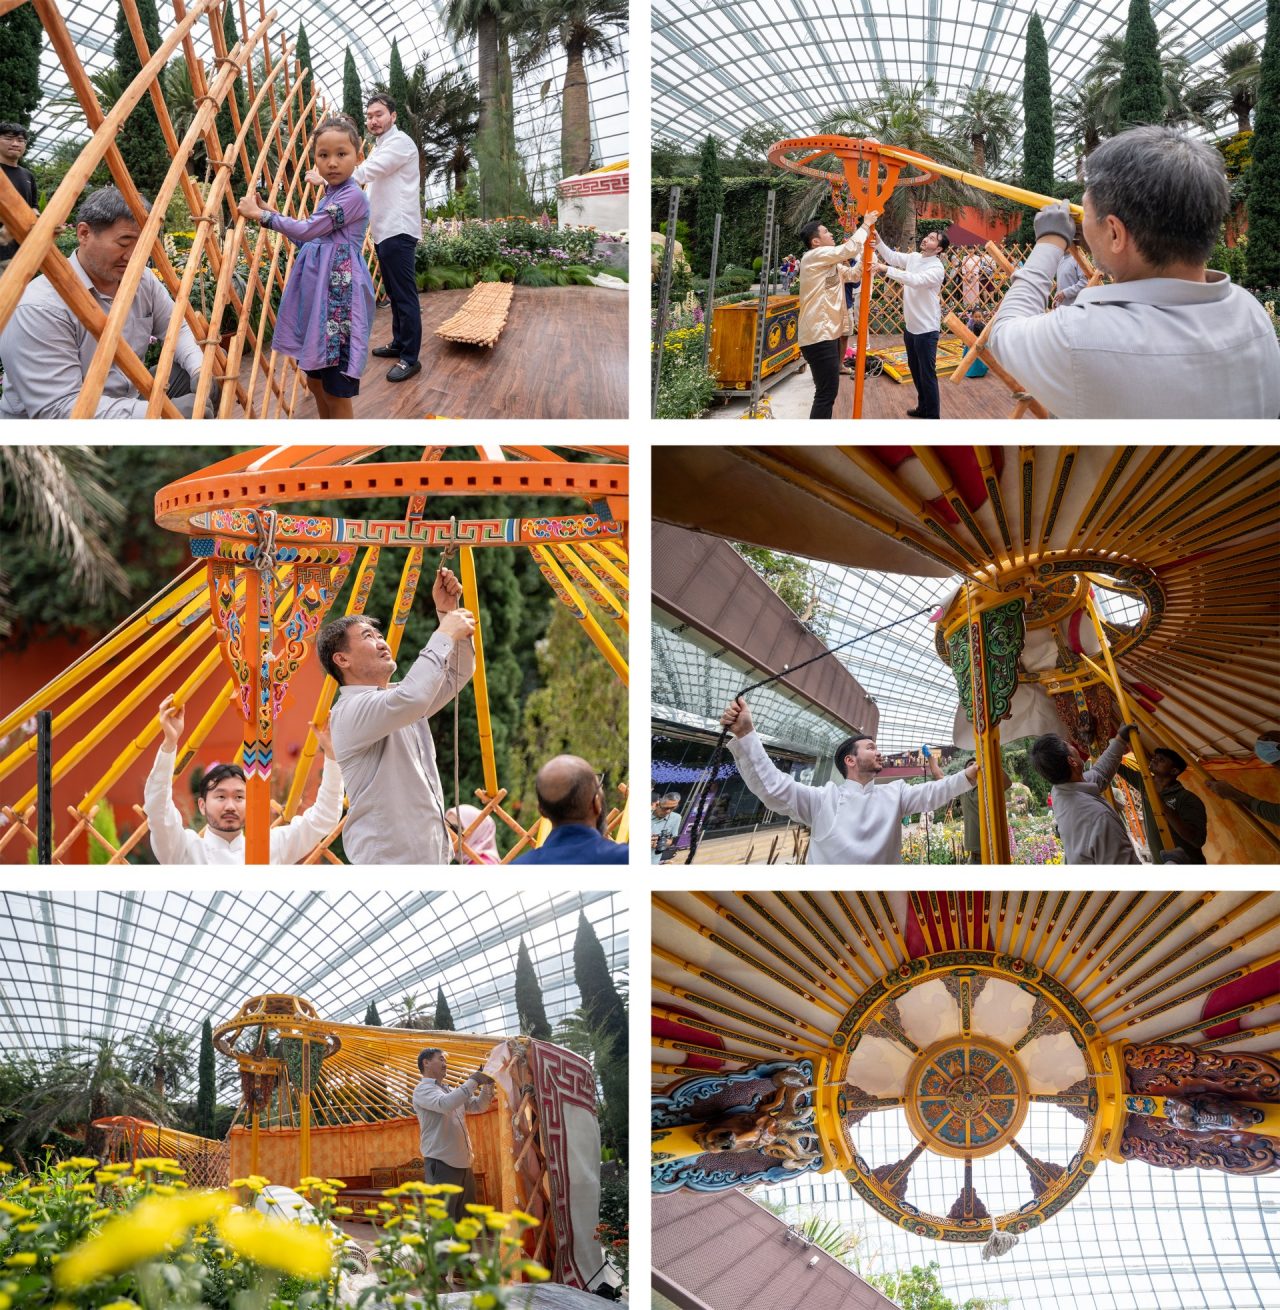 Honouring tradition where families set up their own gers, the Mongolian community in Singapore brought friends and family to set up the gers featured in the Chrysanthemum Charm floral display.